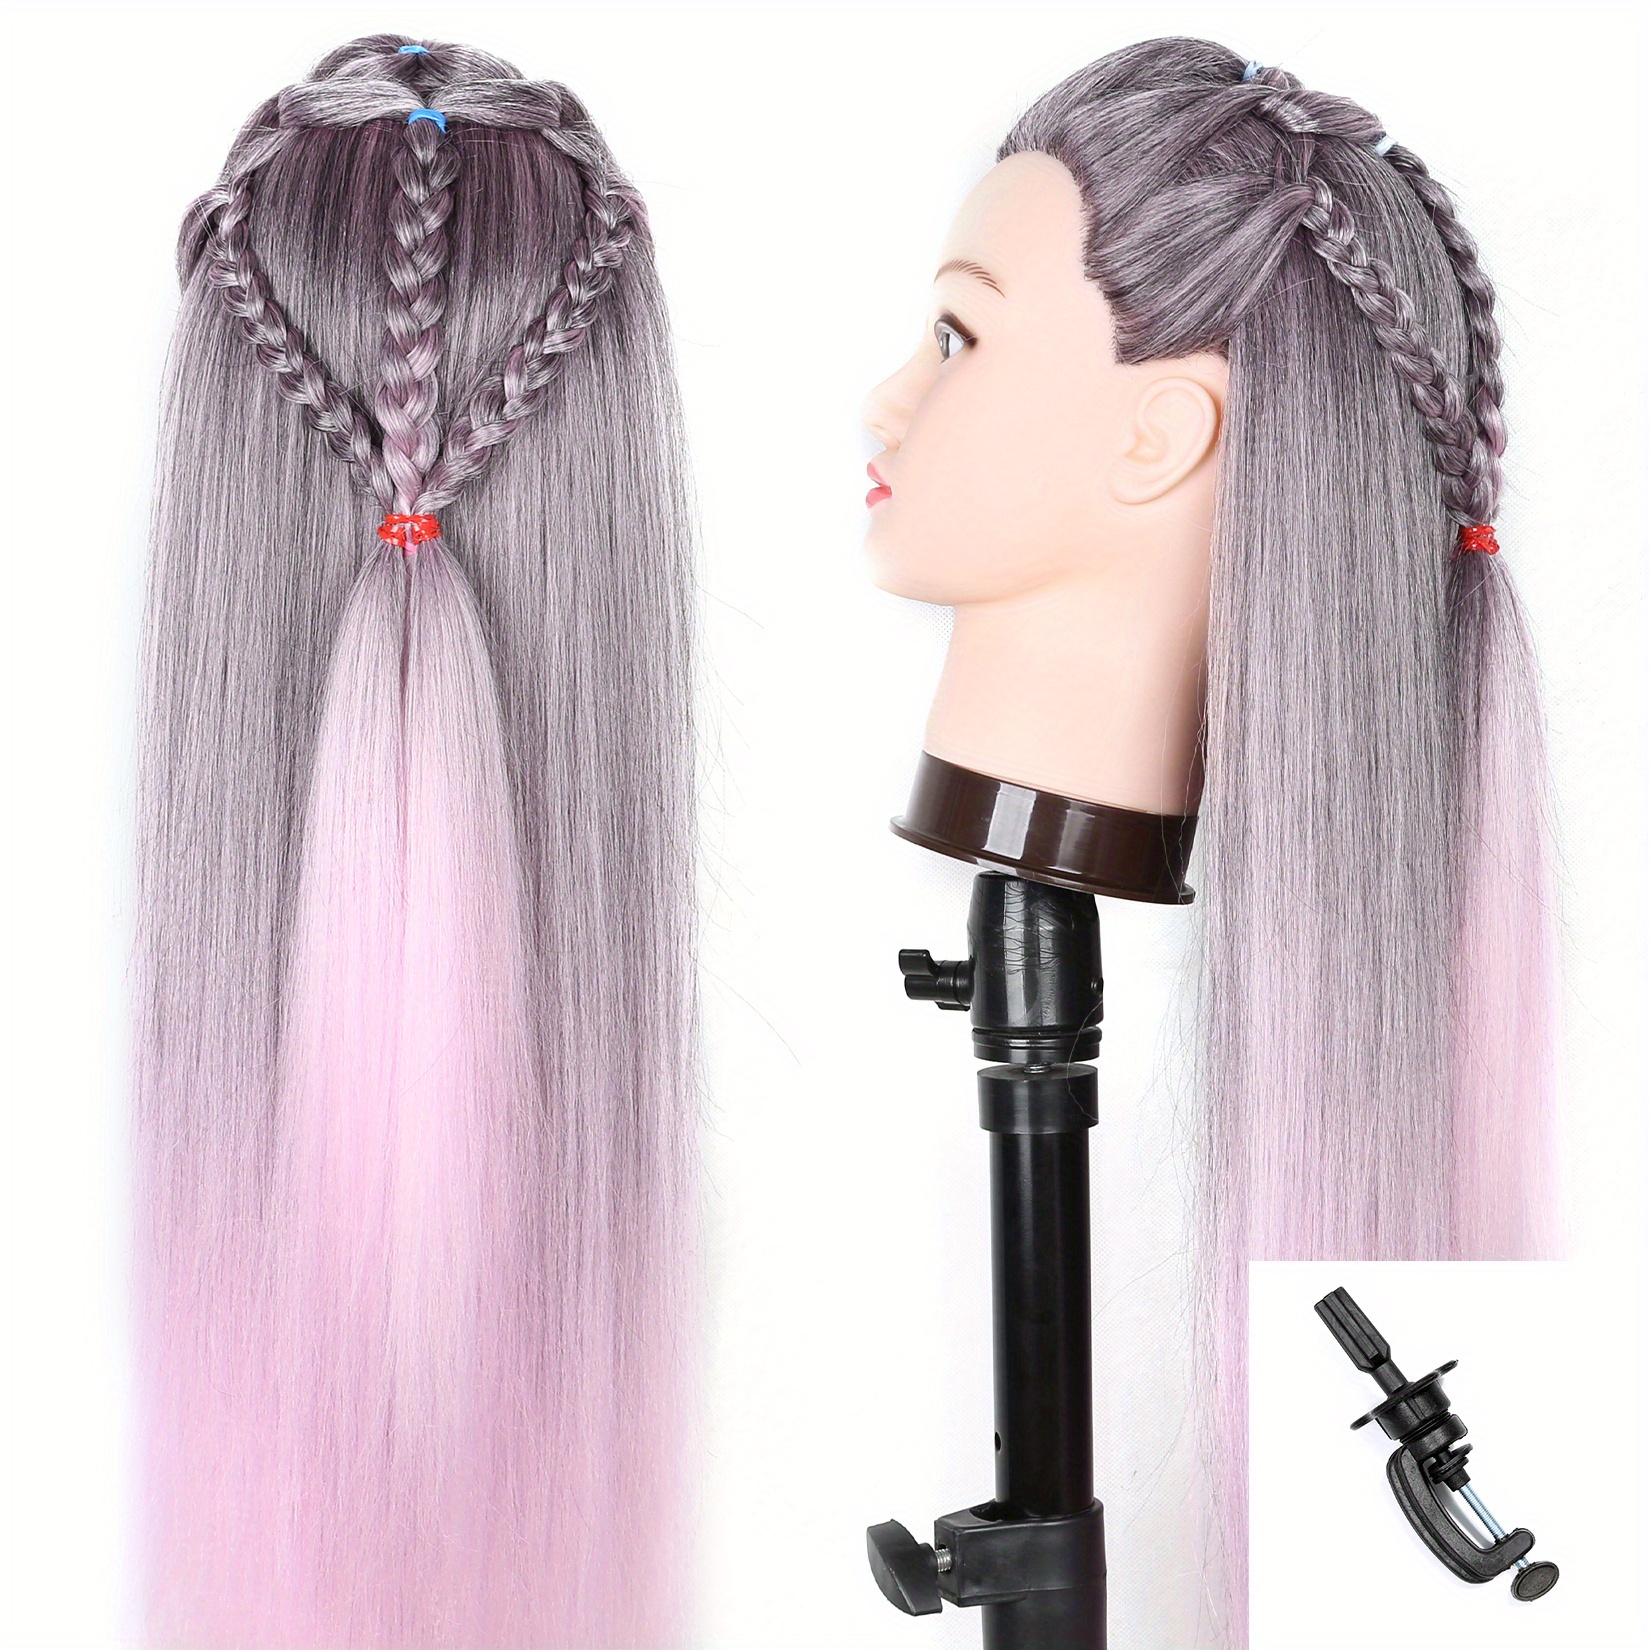 Beauty Star 20 Long Hair Cosmetology Mannequin Manikin Training Head Model with Clamp